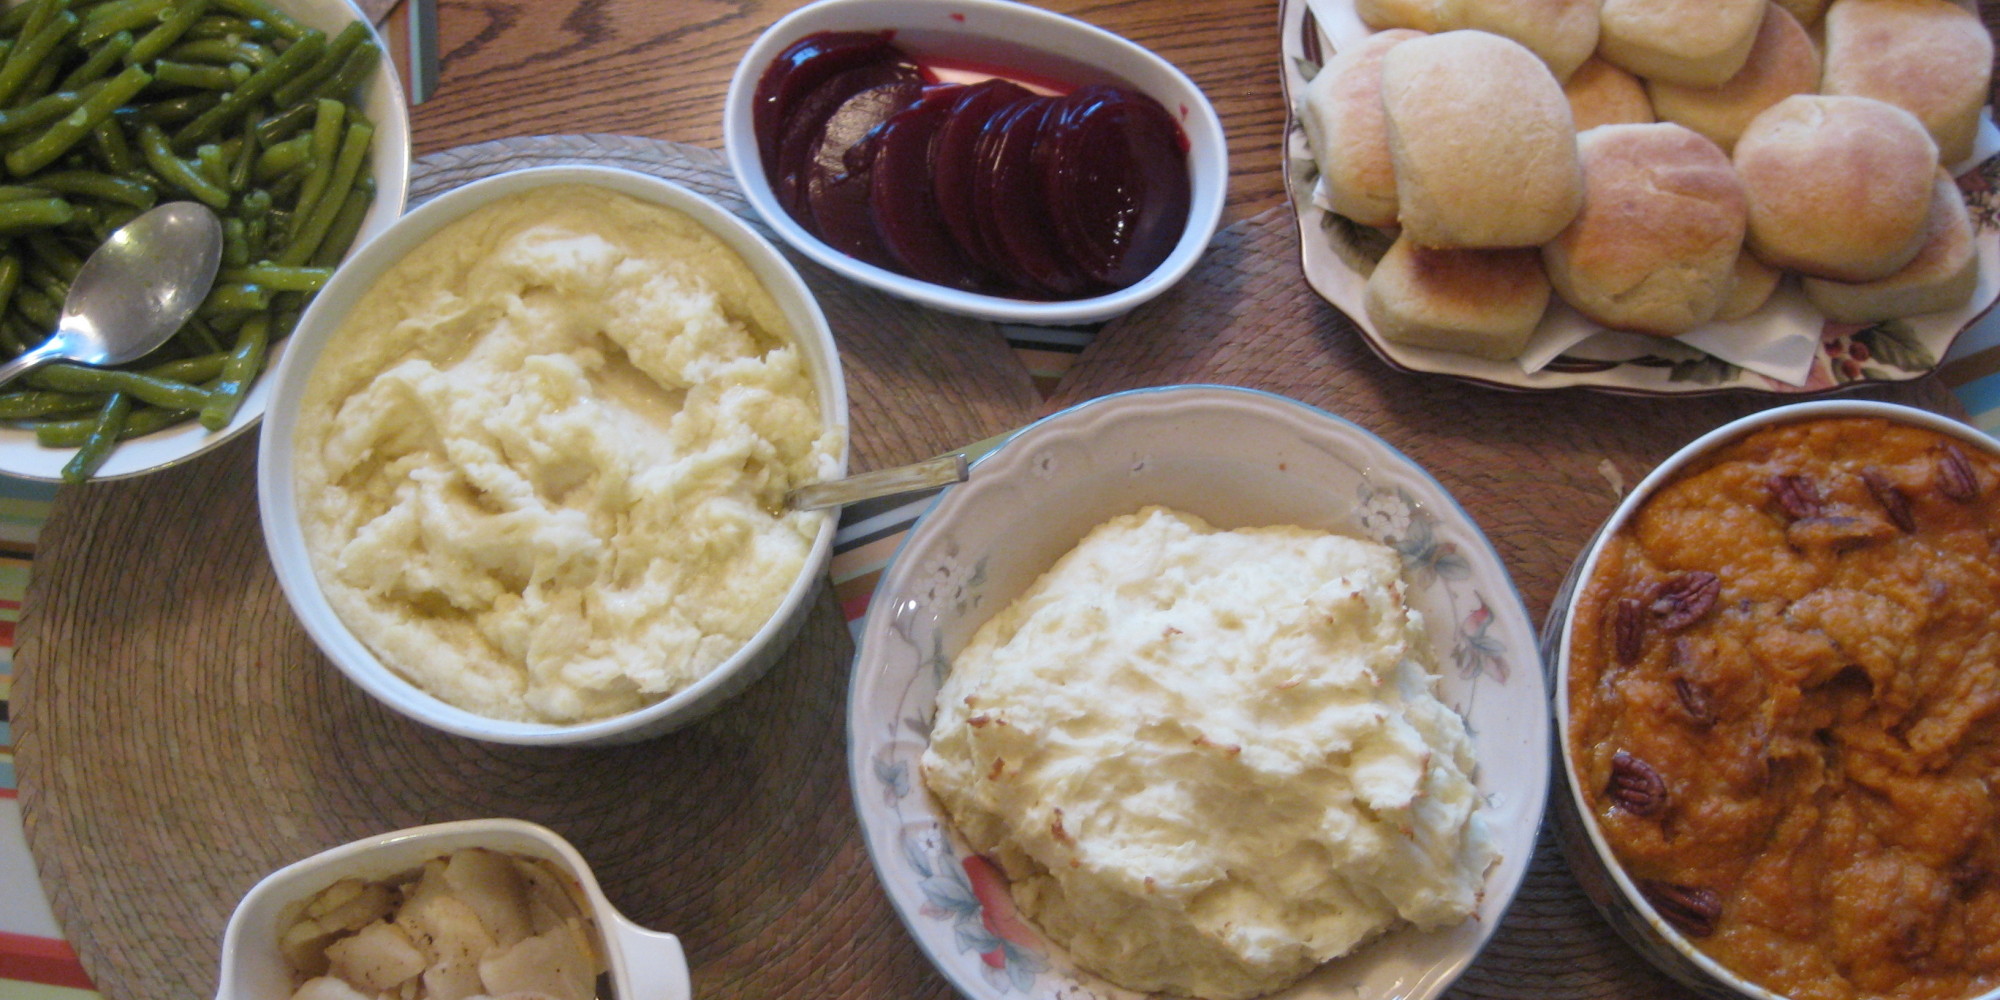 How To Get Your Home Ready for Thanksgiving Dinner | HuffPost